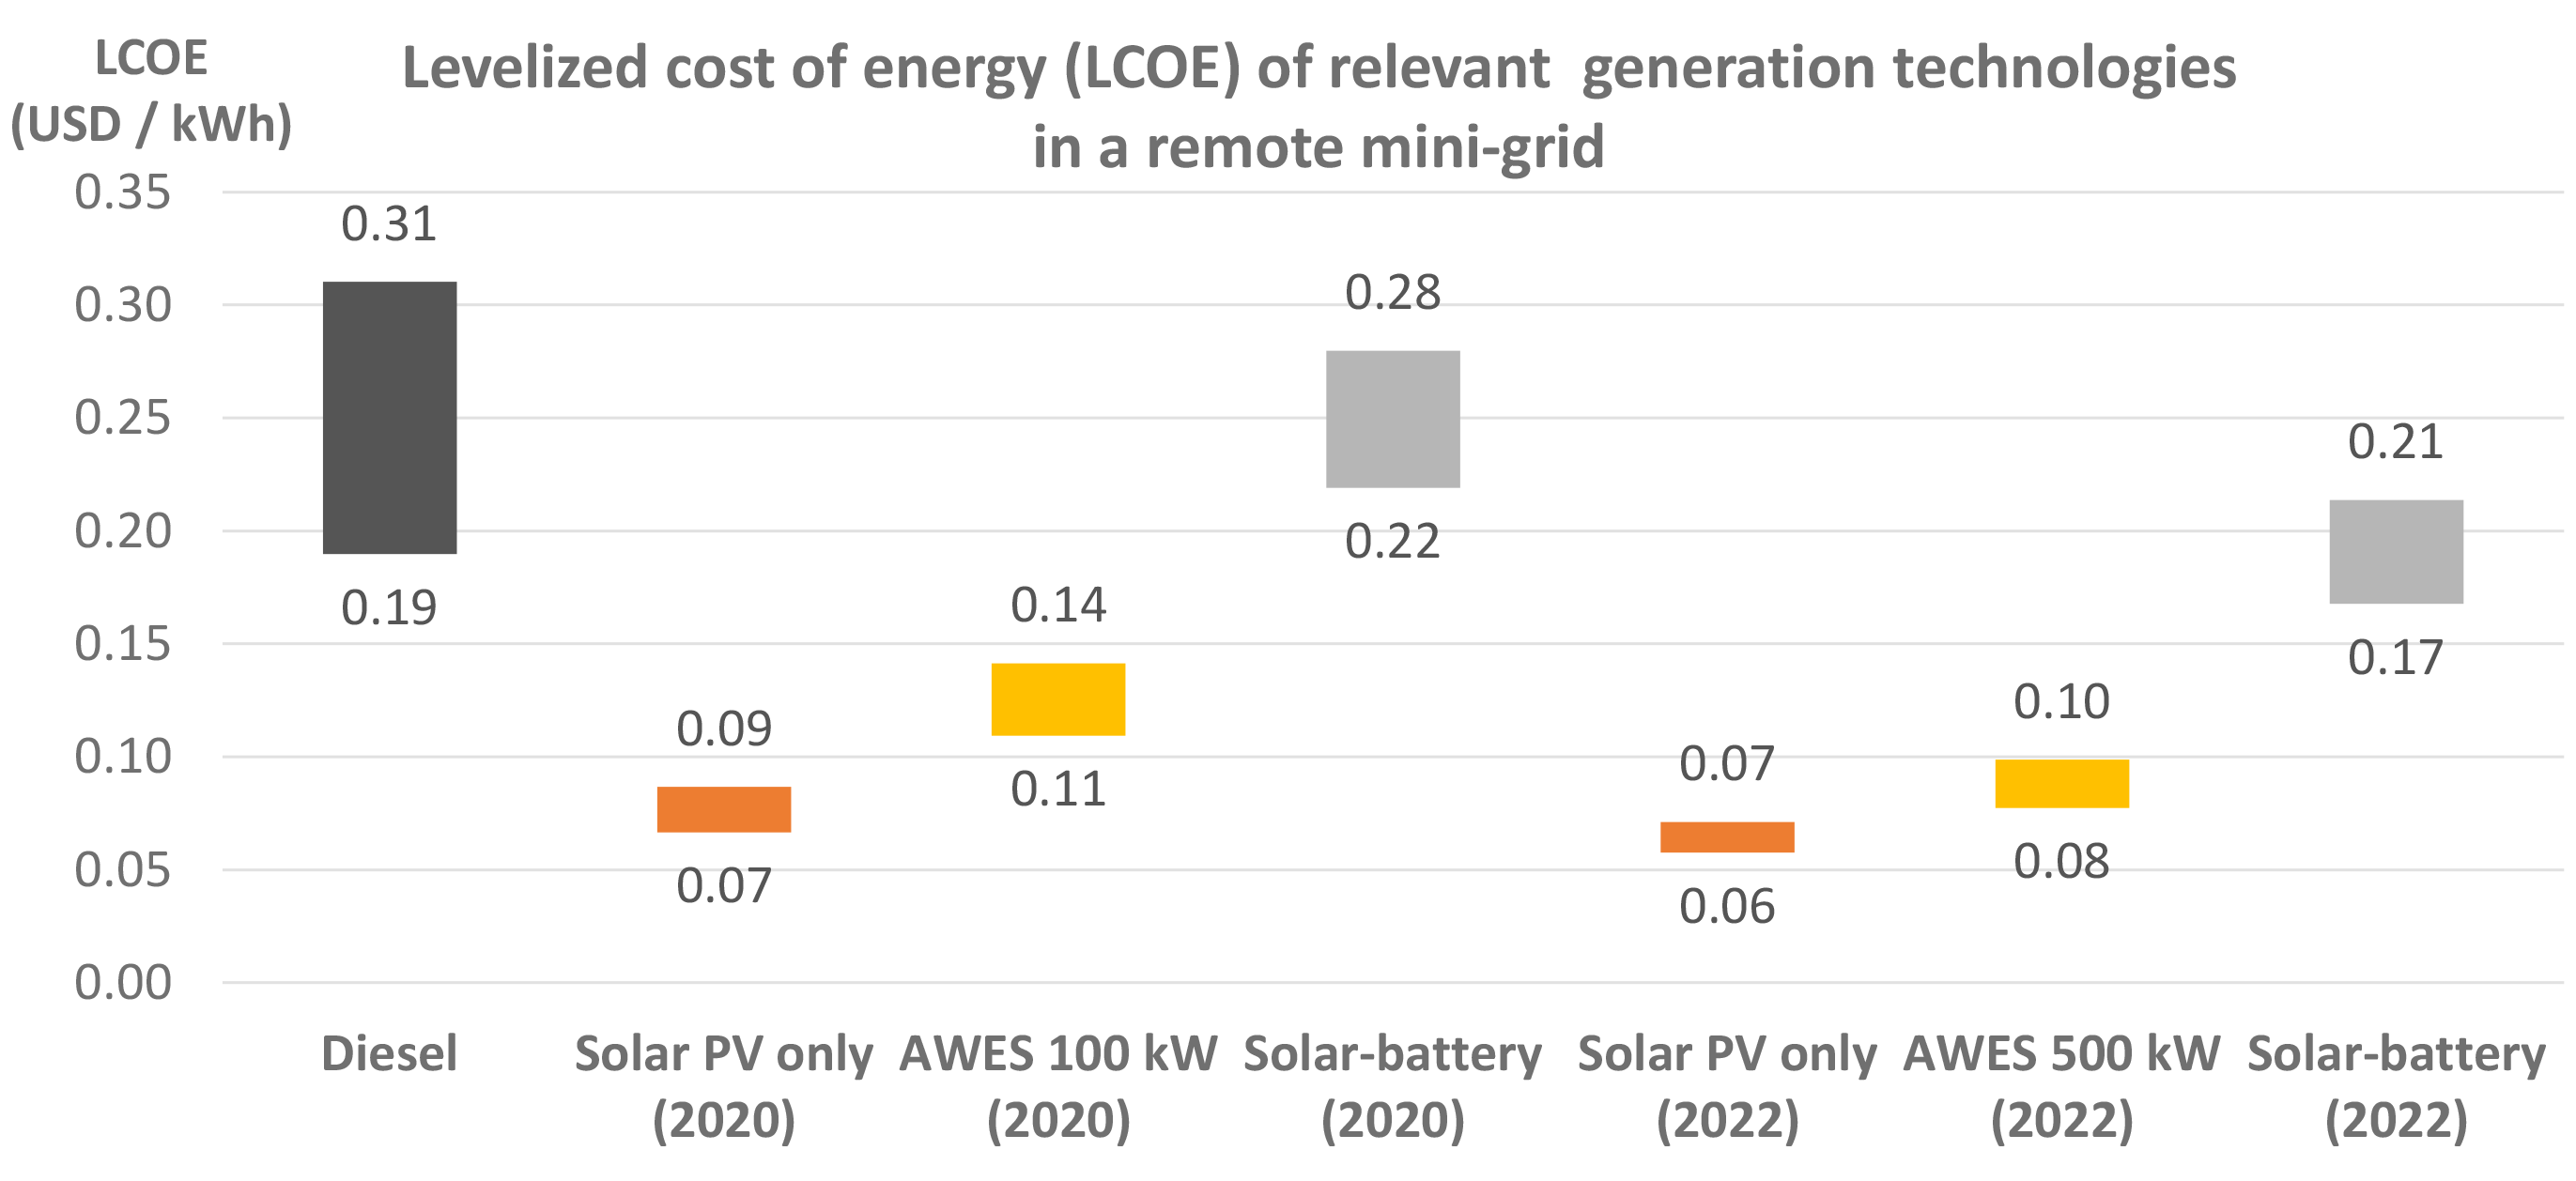 Levelized cost of energy (LCOE) of relevant generation technologies in a remote mini-grid